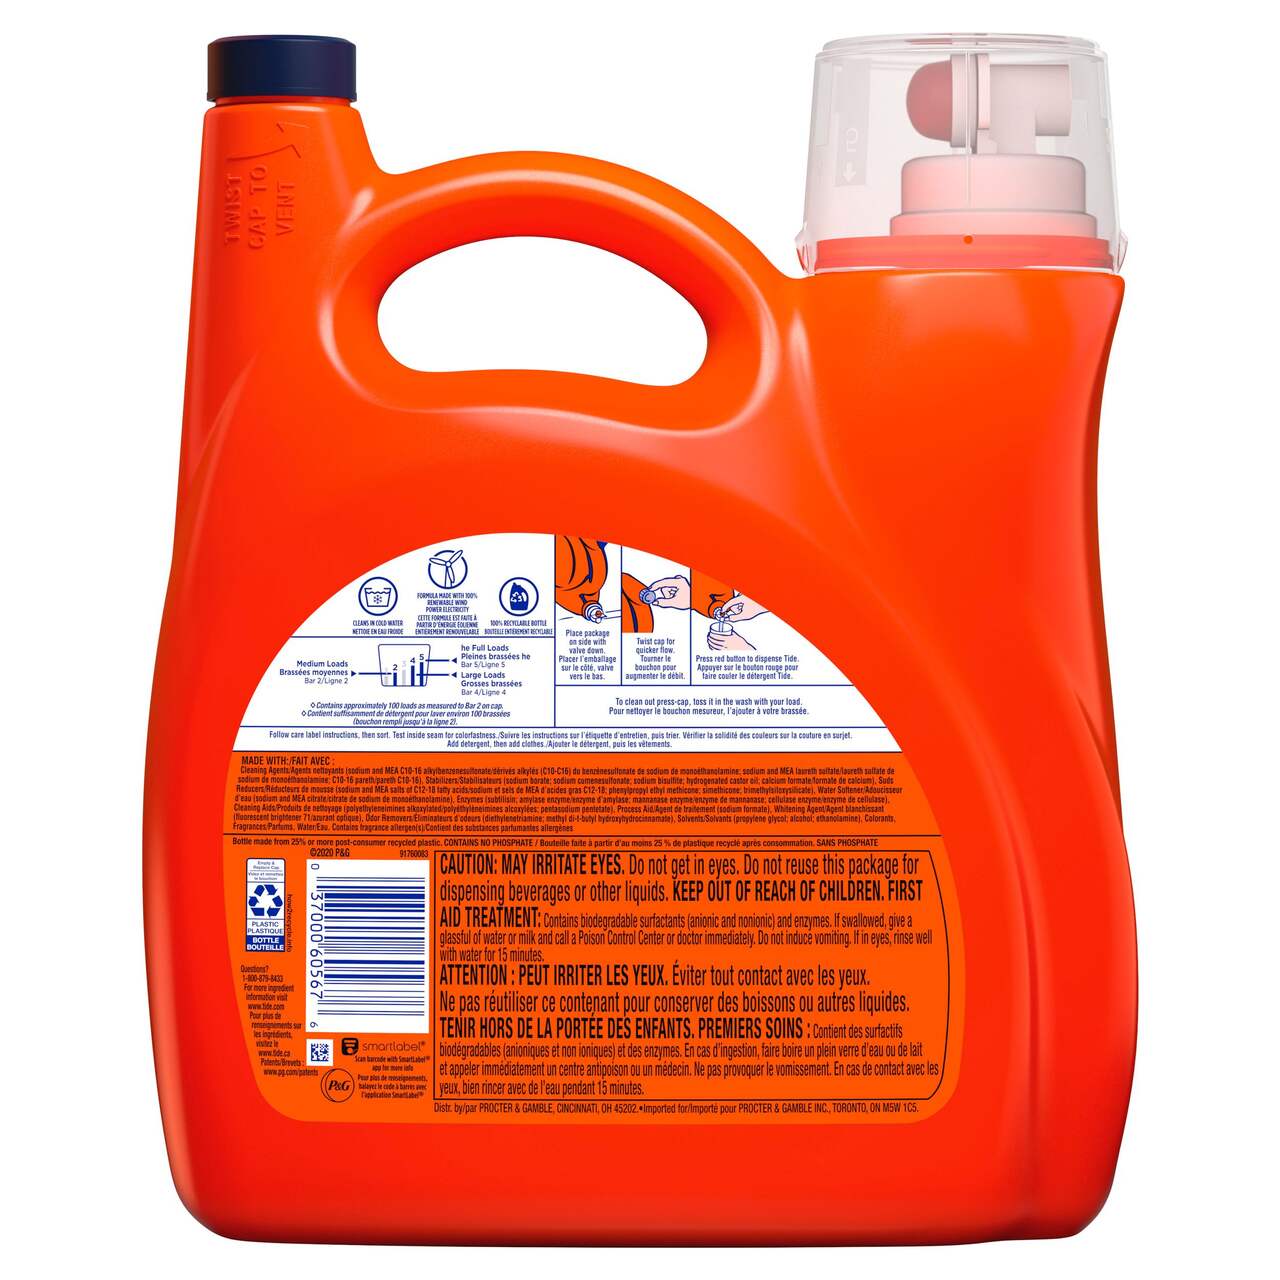 https://media-www.canadiantire.ca/product/living/home-essentials/laundry-hand-dish-cleaning-solutions/1531750/tide-liquid-he-with-touch-of-downy-april-fresh-100-load-c376357e-455a-4dc6-9262-9742b7437d3a-jpgrendition.jpg?imdensity=1&imwidth=1244&impolicy=mZoom